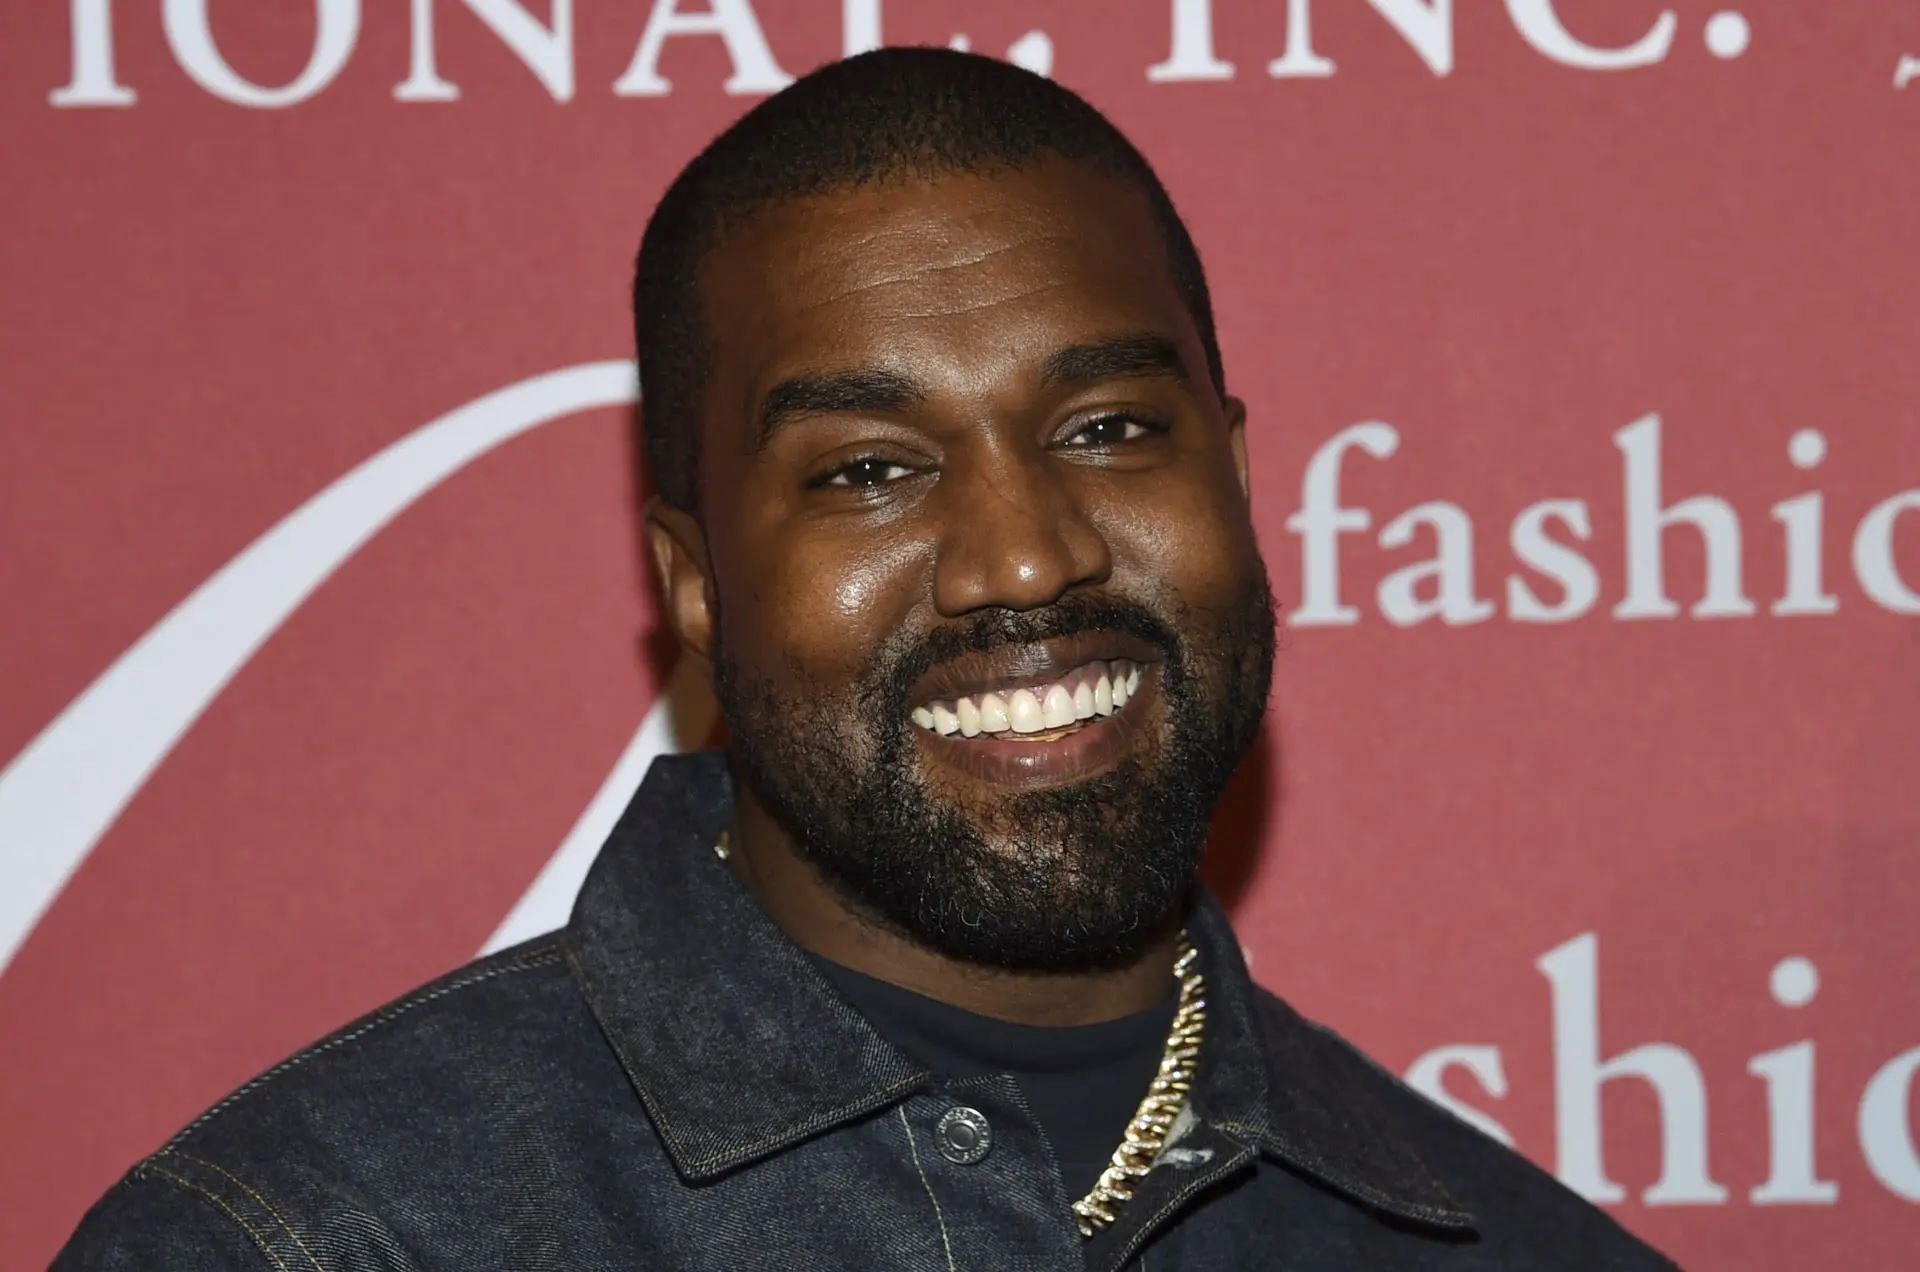 Kanye West Takes Legal Action Against Leaked Music On Instagram